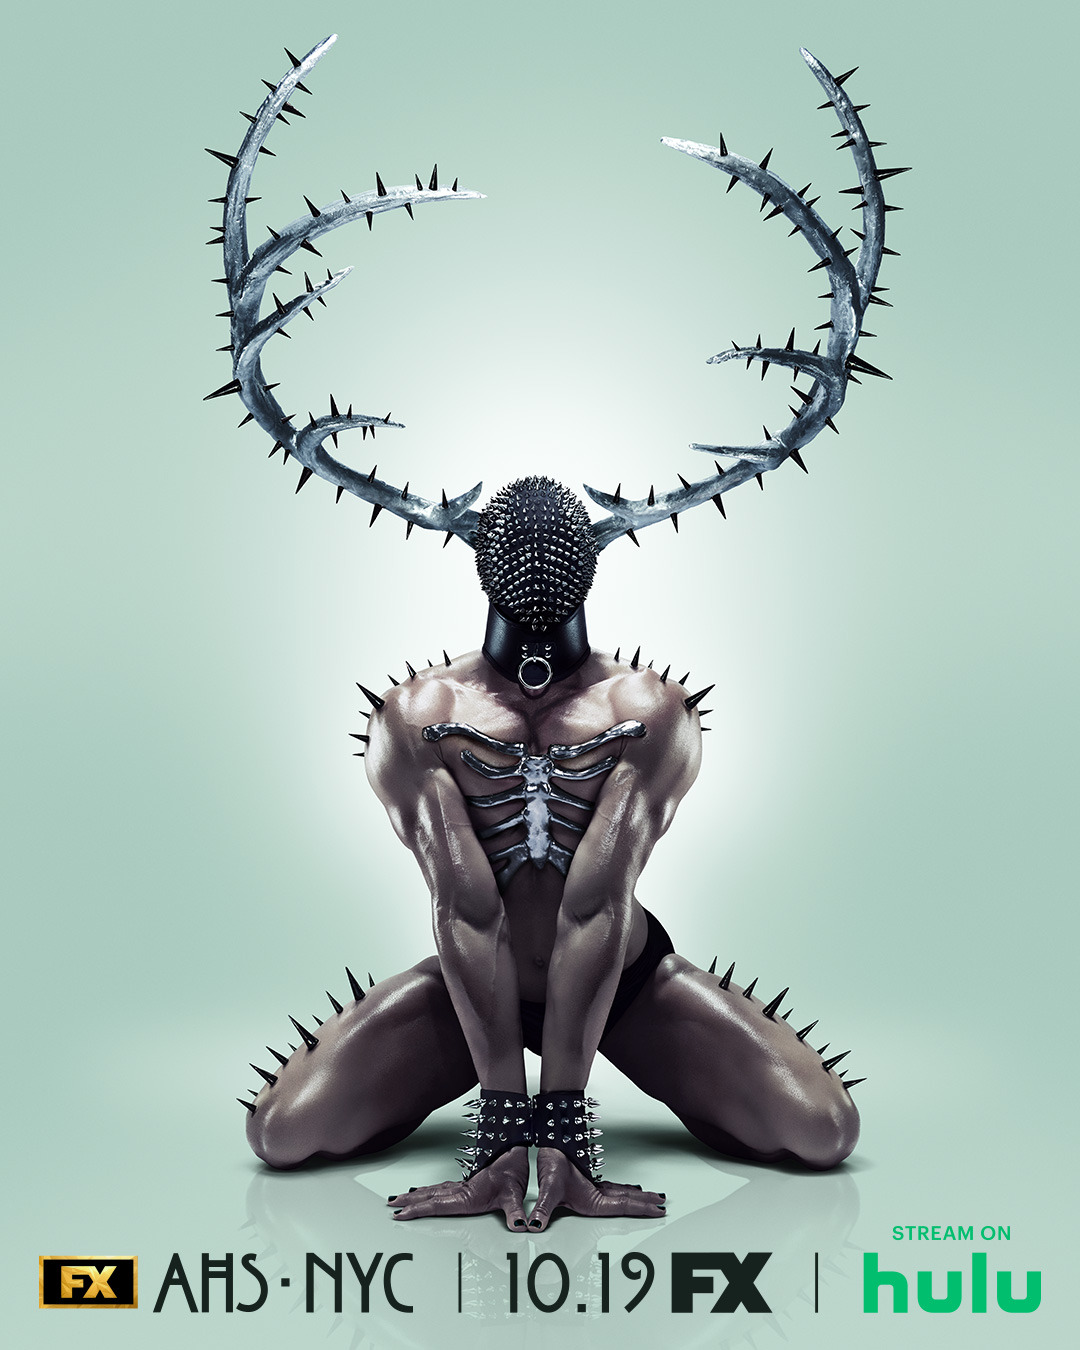 Extra Large TV Poster Image for American Horror Story (#156 of 176)